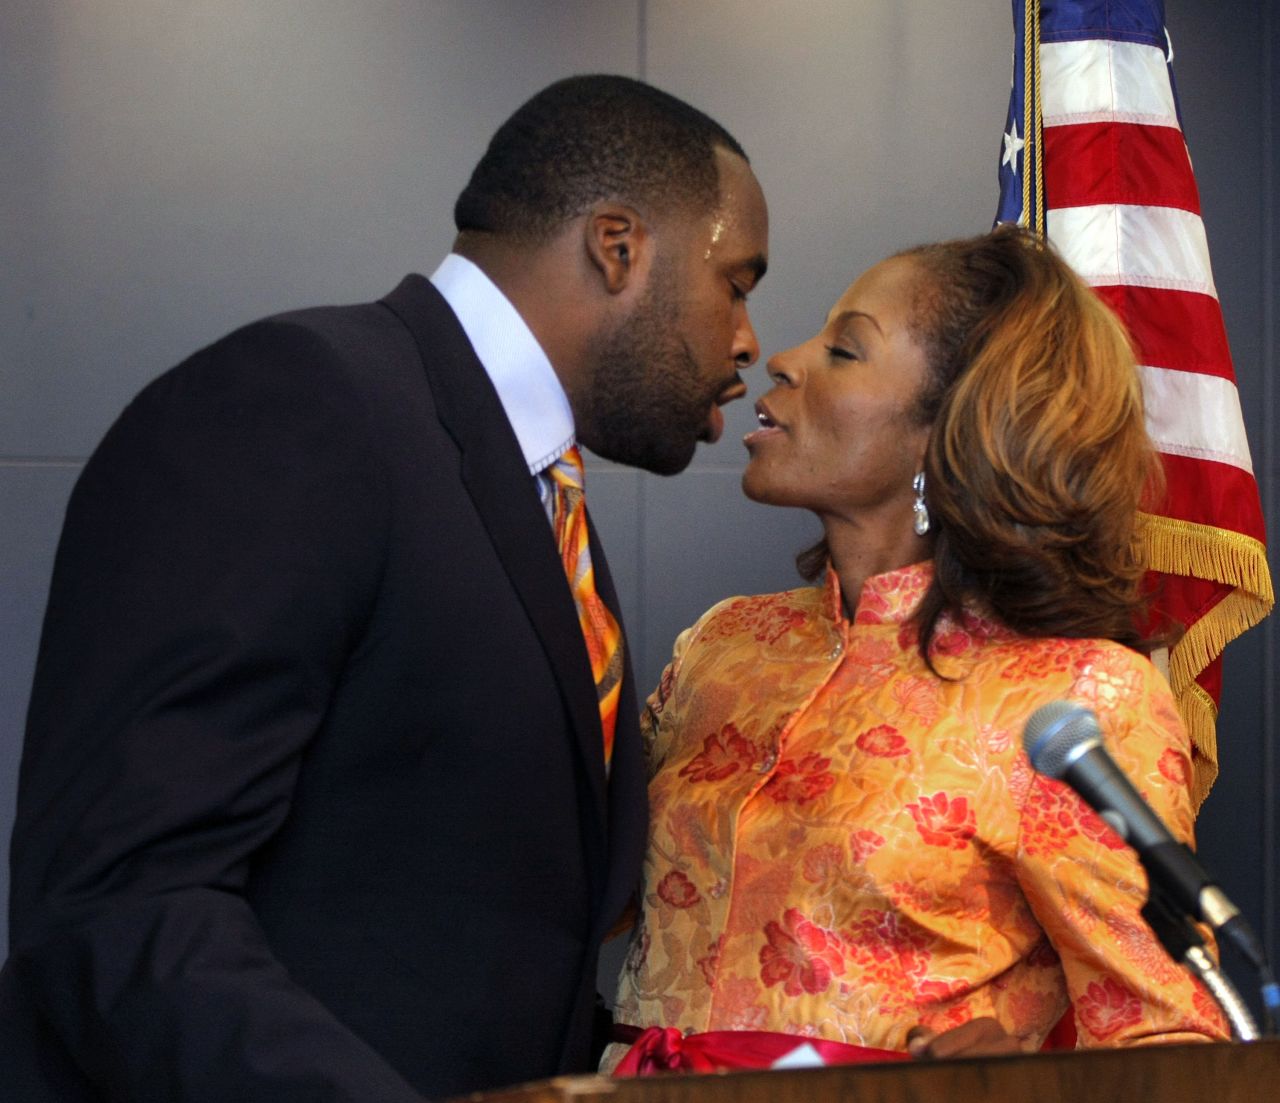 <strong>Kwame Kilpatrick is </strong>the former Detroit mayor who pleaded guilty to obstruction of justice after investigators showed text messages between him and his mistress involving sex that he said never happened. In response to her text about whether he missed her sexually, he replied: "<a href="http://www.freep.com/apps/pbcs.dll/article?AID=/20080124/NEWS05/801240414&theme=KILPATRICK082007 <http://www.freep.com/apps/pbcs.dll/article?AID=/20080124/NEWS05/801240414&theme=KILPATRICK082007" target="_blank" target="_blank">Hell yeah! You couldn't tell. I want some more</a>." In October 2013, Kilpatrick was sentenced to 28 years in prison after his conviction on two dozen federal charges, including racketeering, extortion and the filing of false tax returns. 